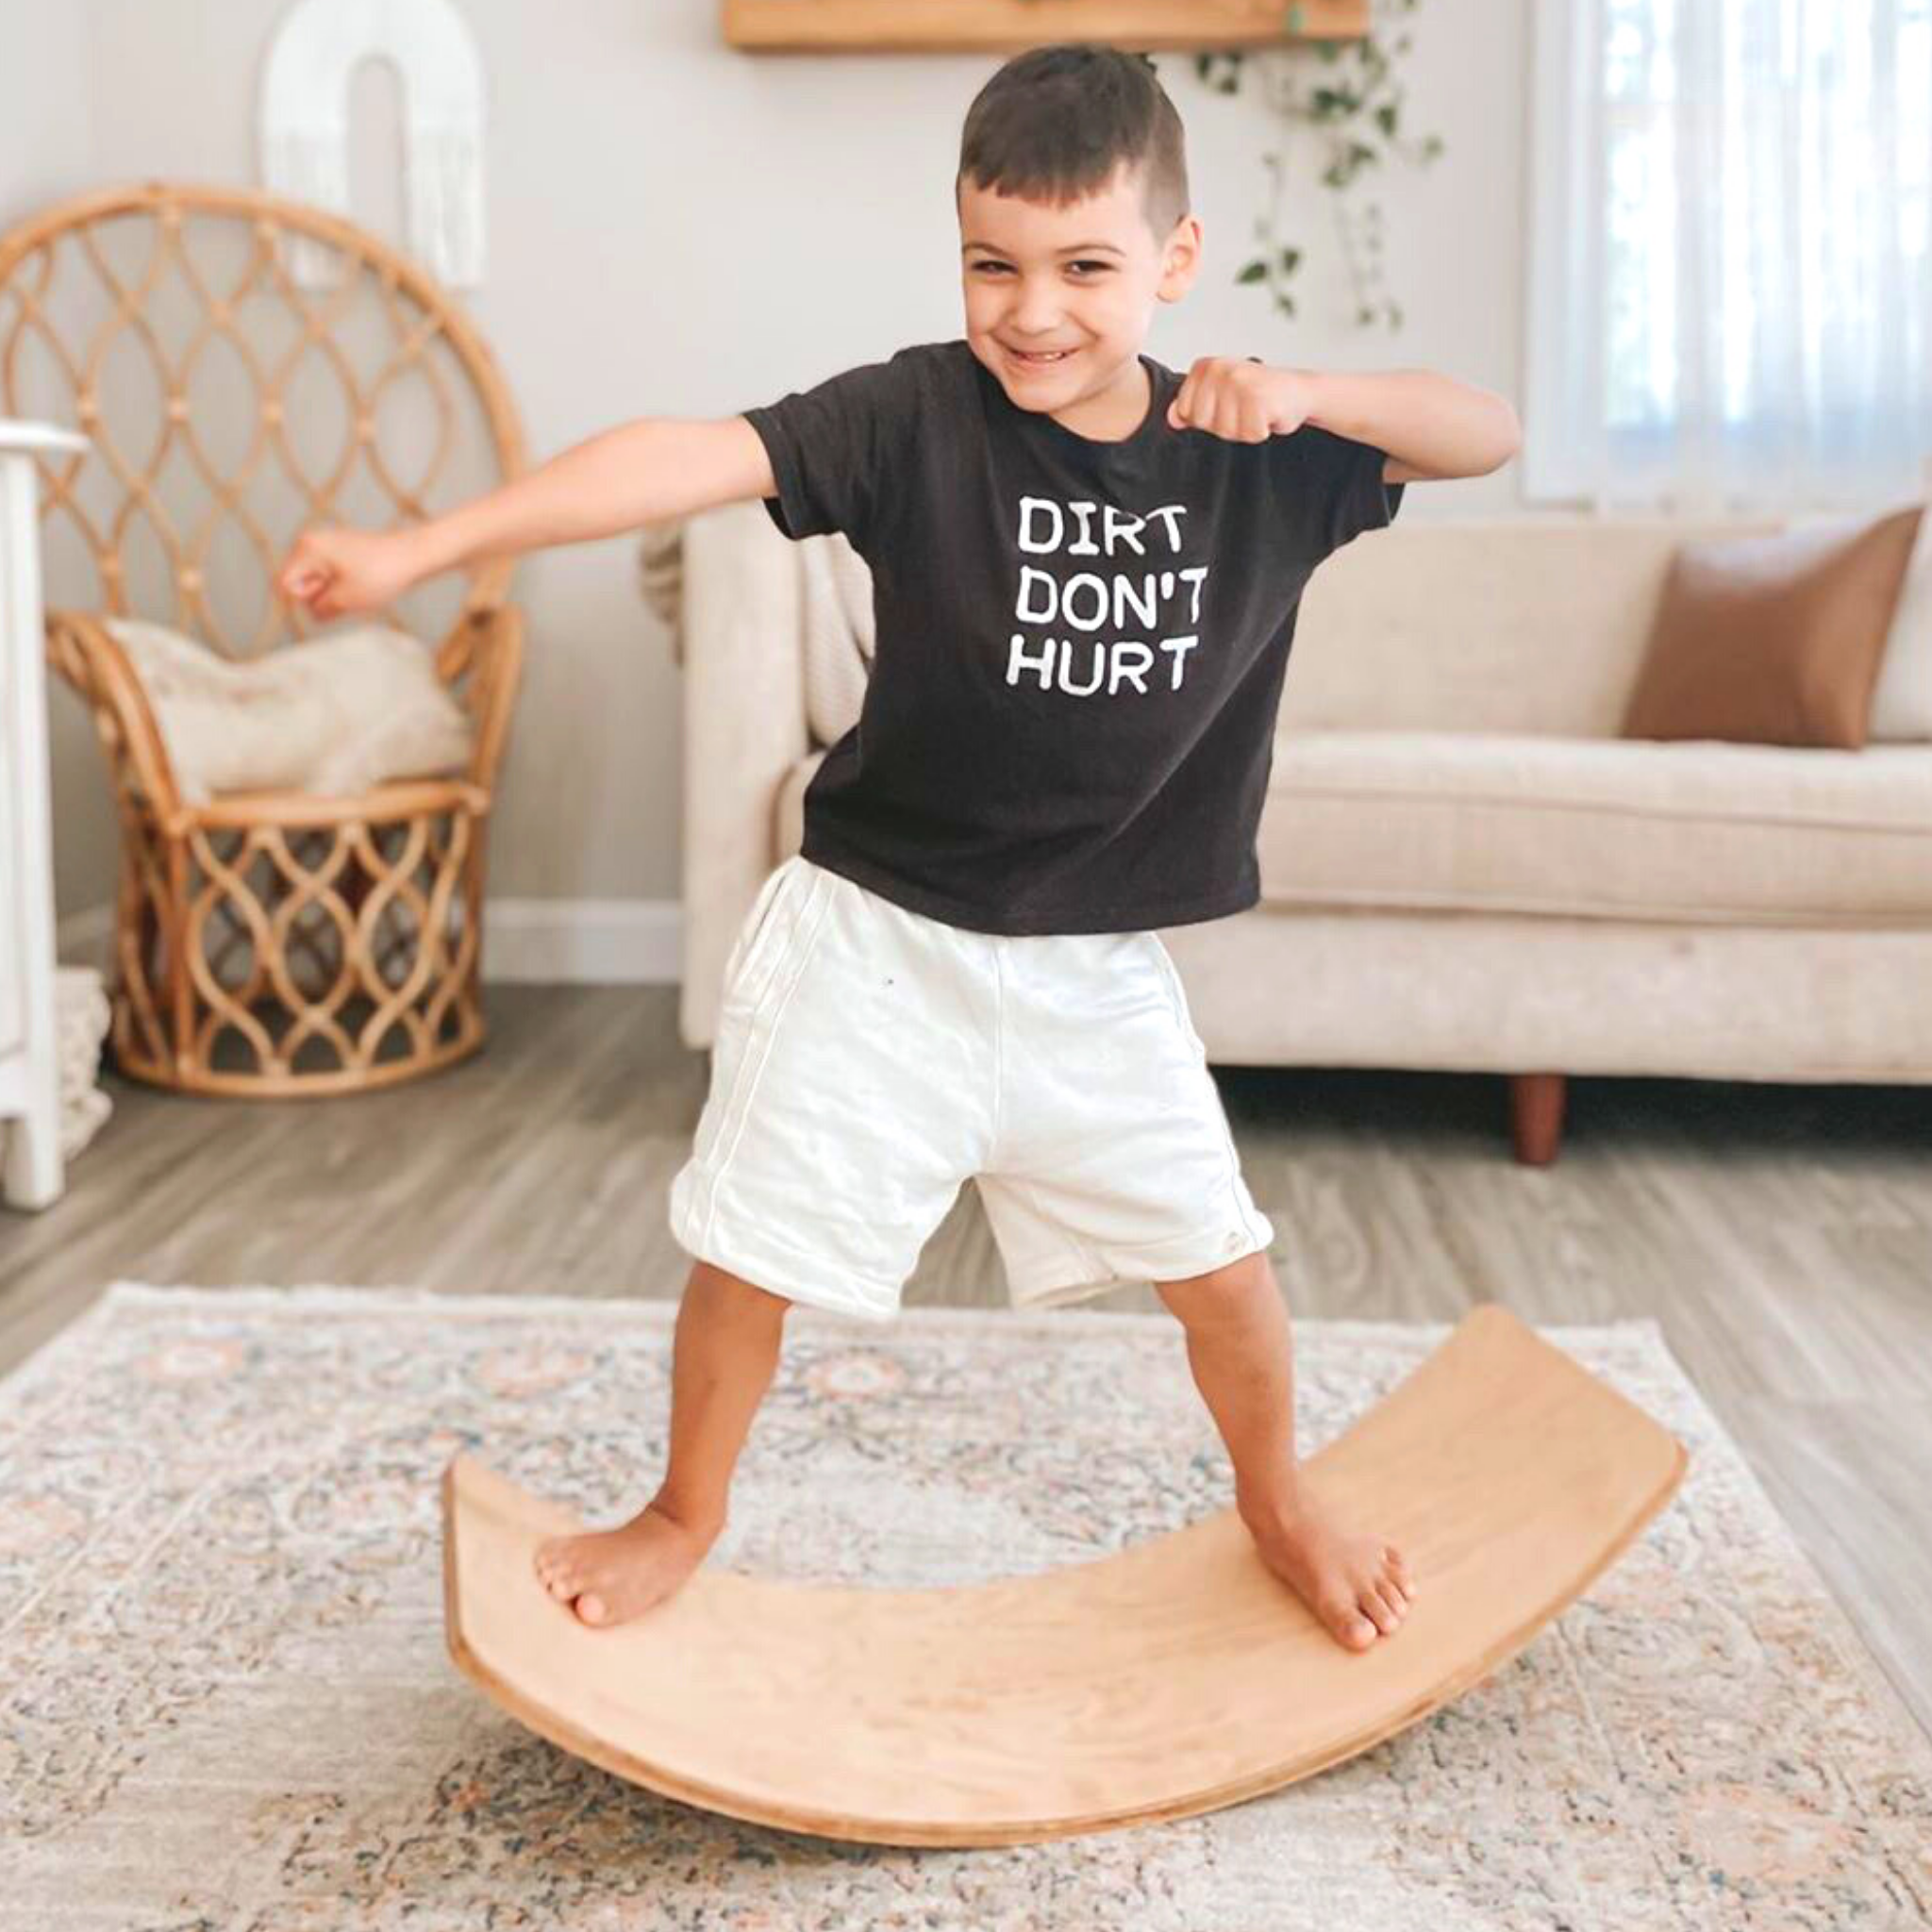 A child with medium light skin tone and short brown hair stands with their feet spread out on either side of the Starter Wobble Board. Their arms are pulled up in a fighting pose and they are smiling.